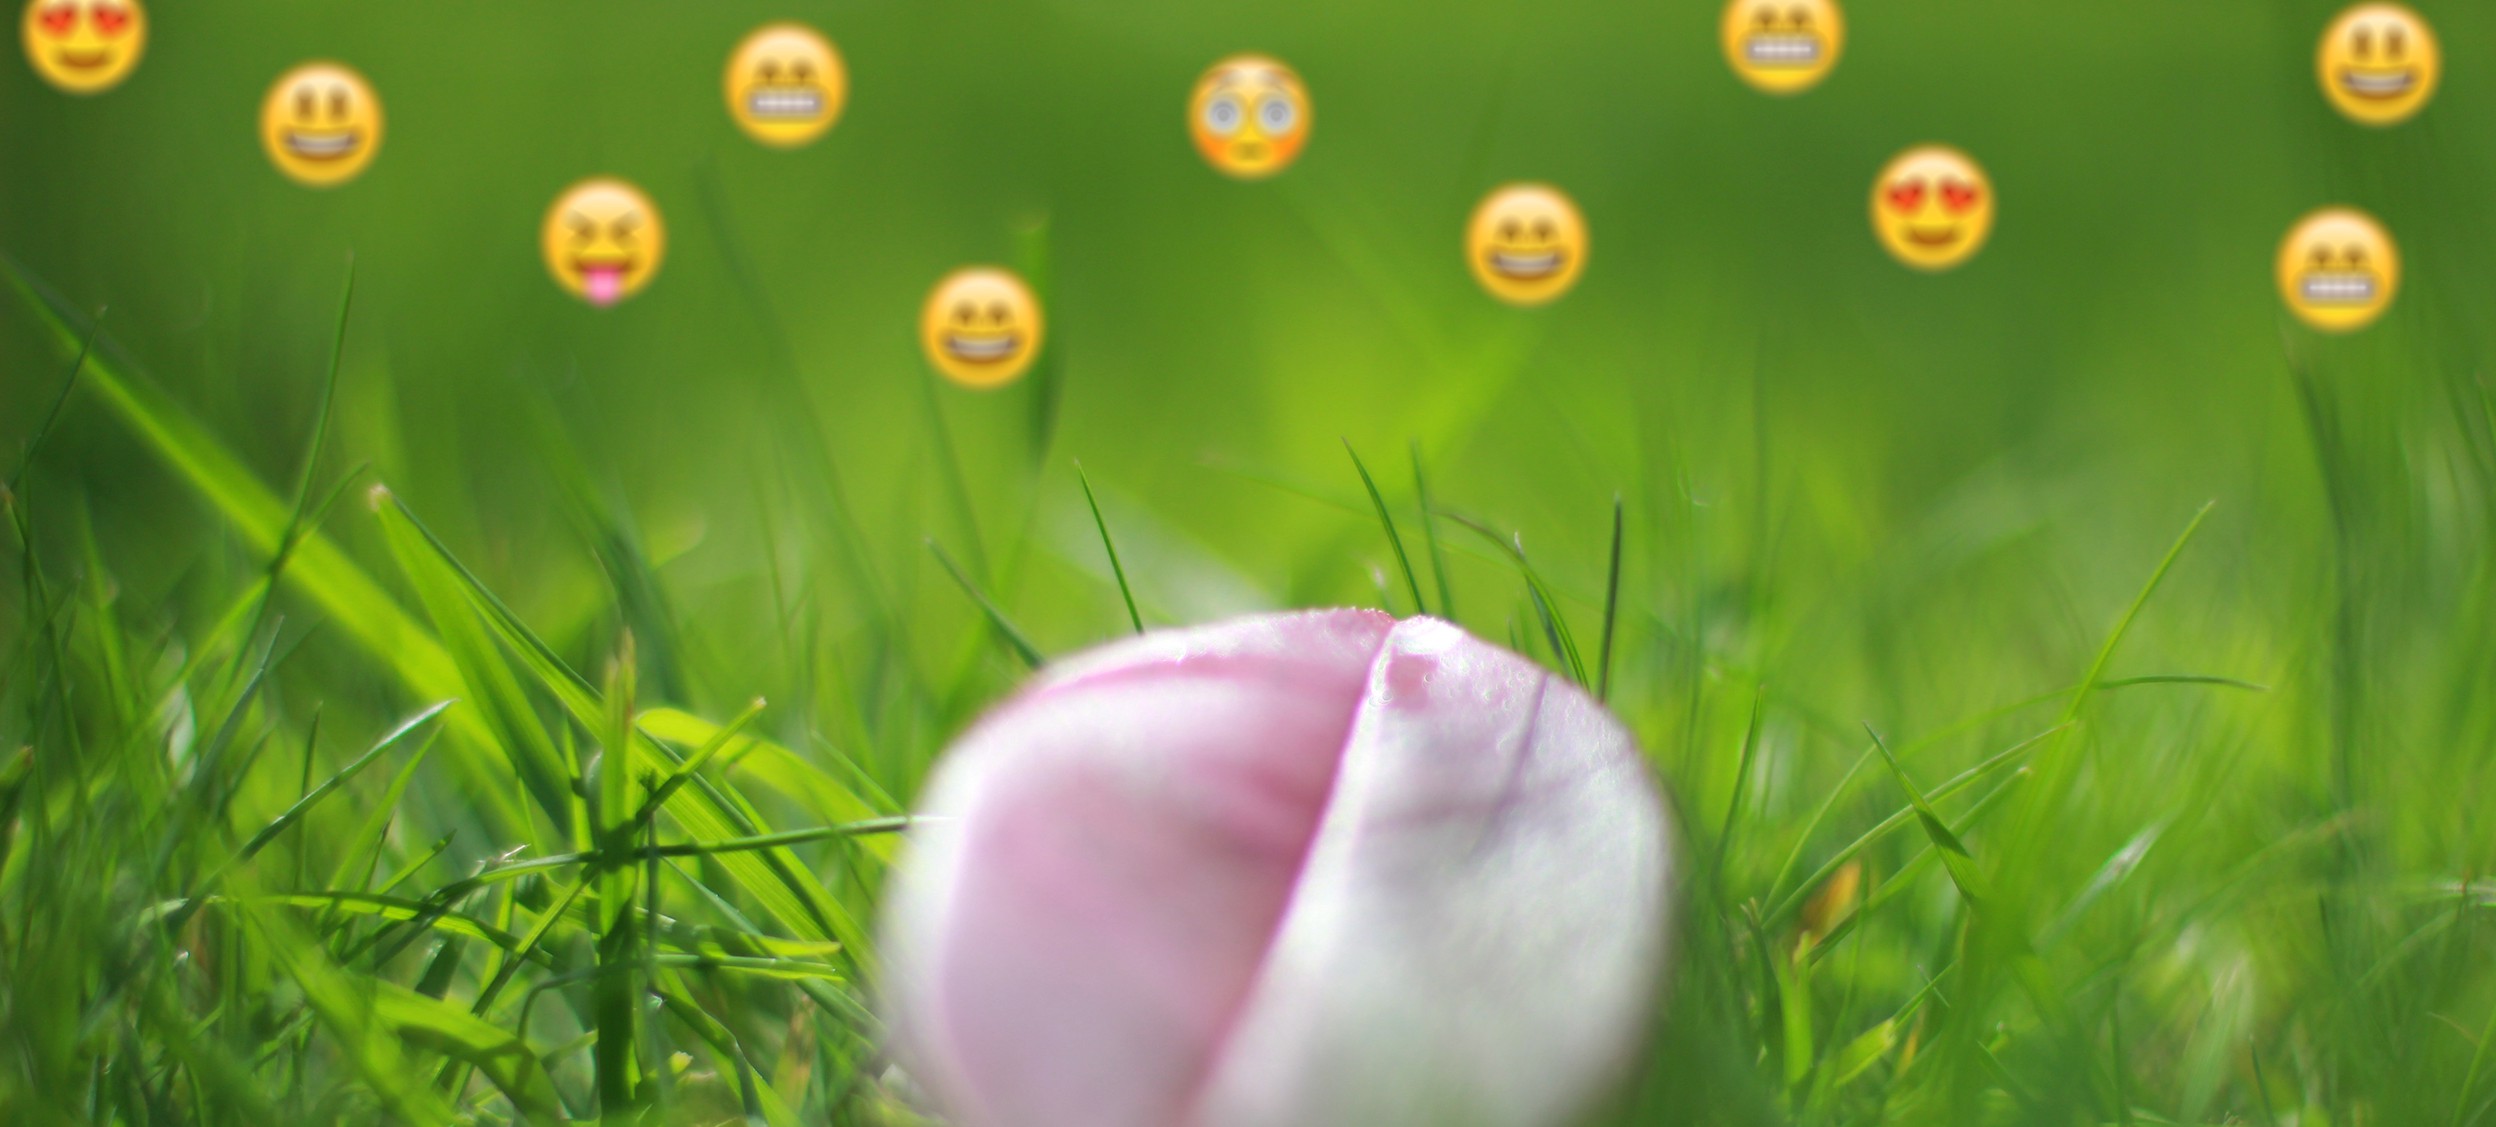 A petal lying in grass, surrounded by emoji.